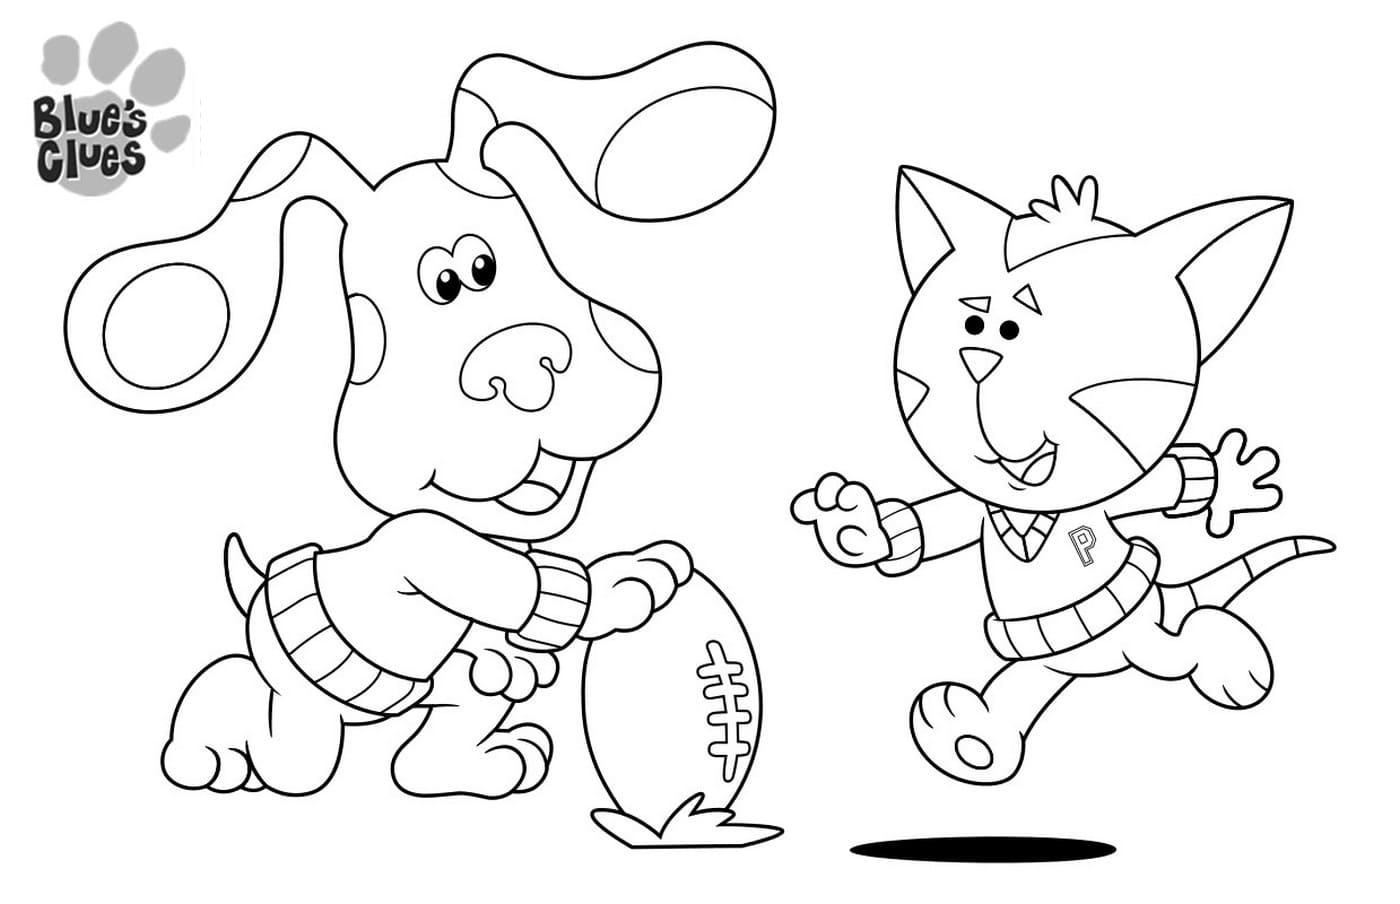 blues clues coloring pages soccer